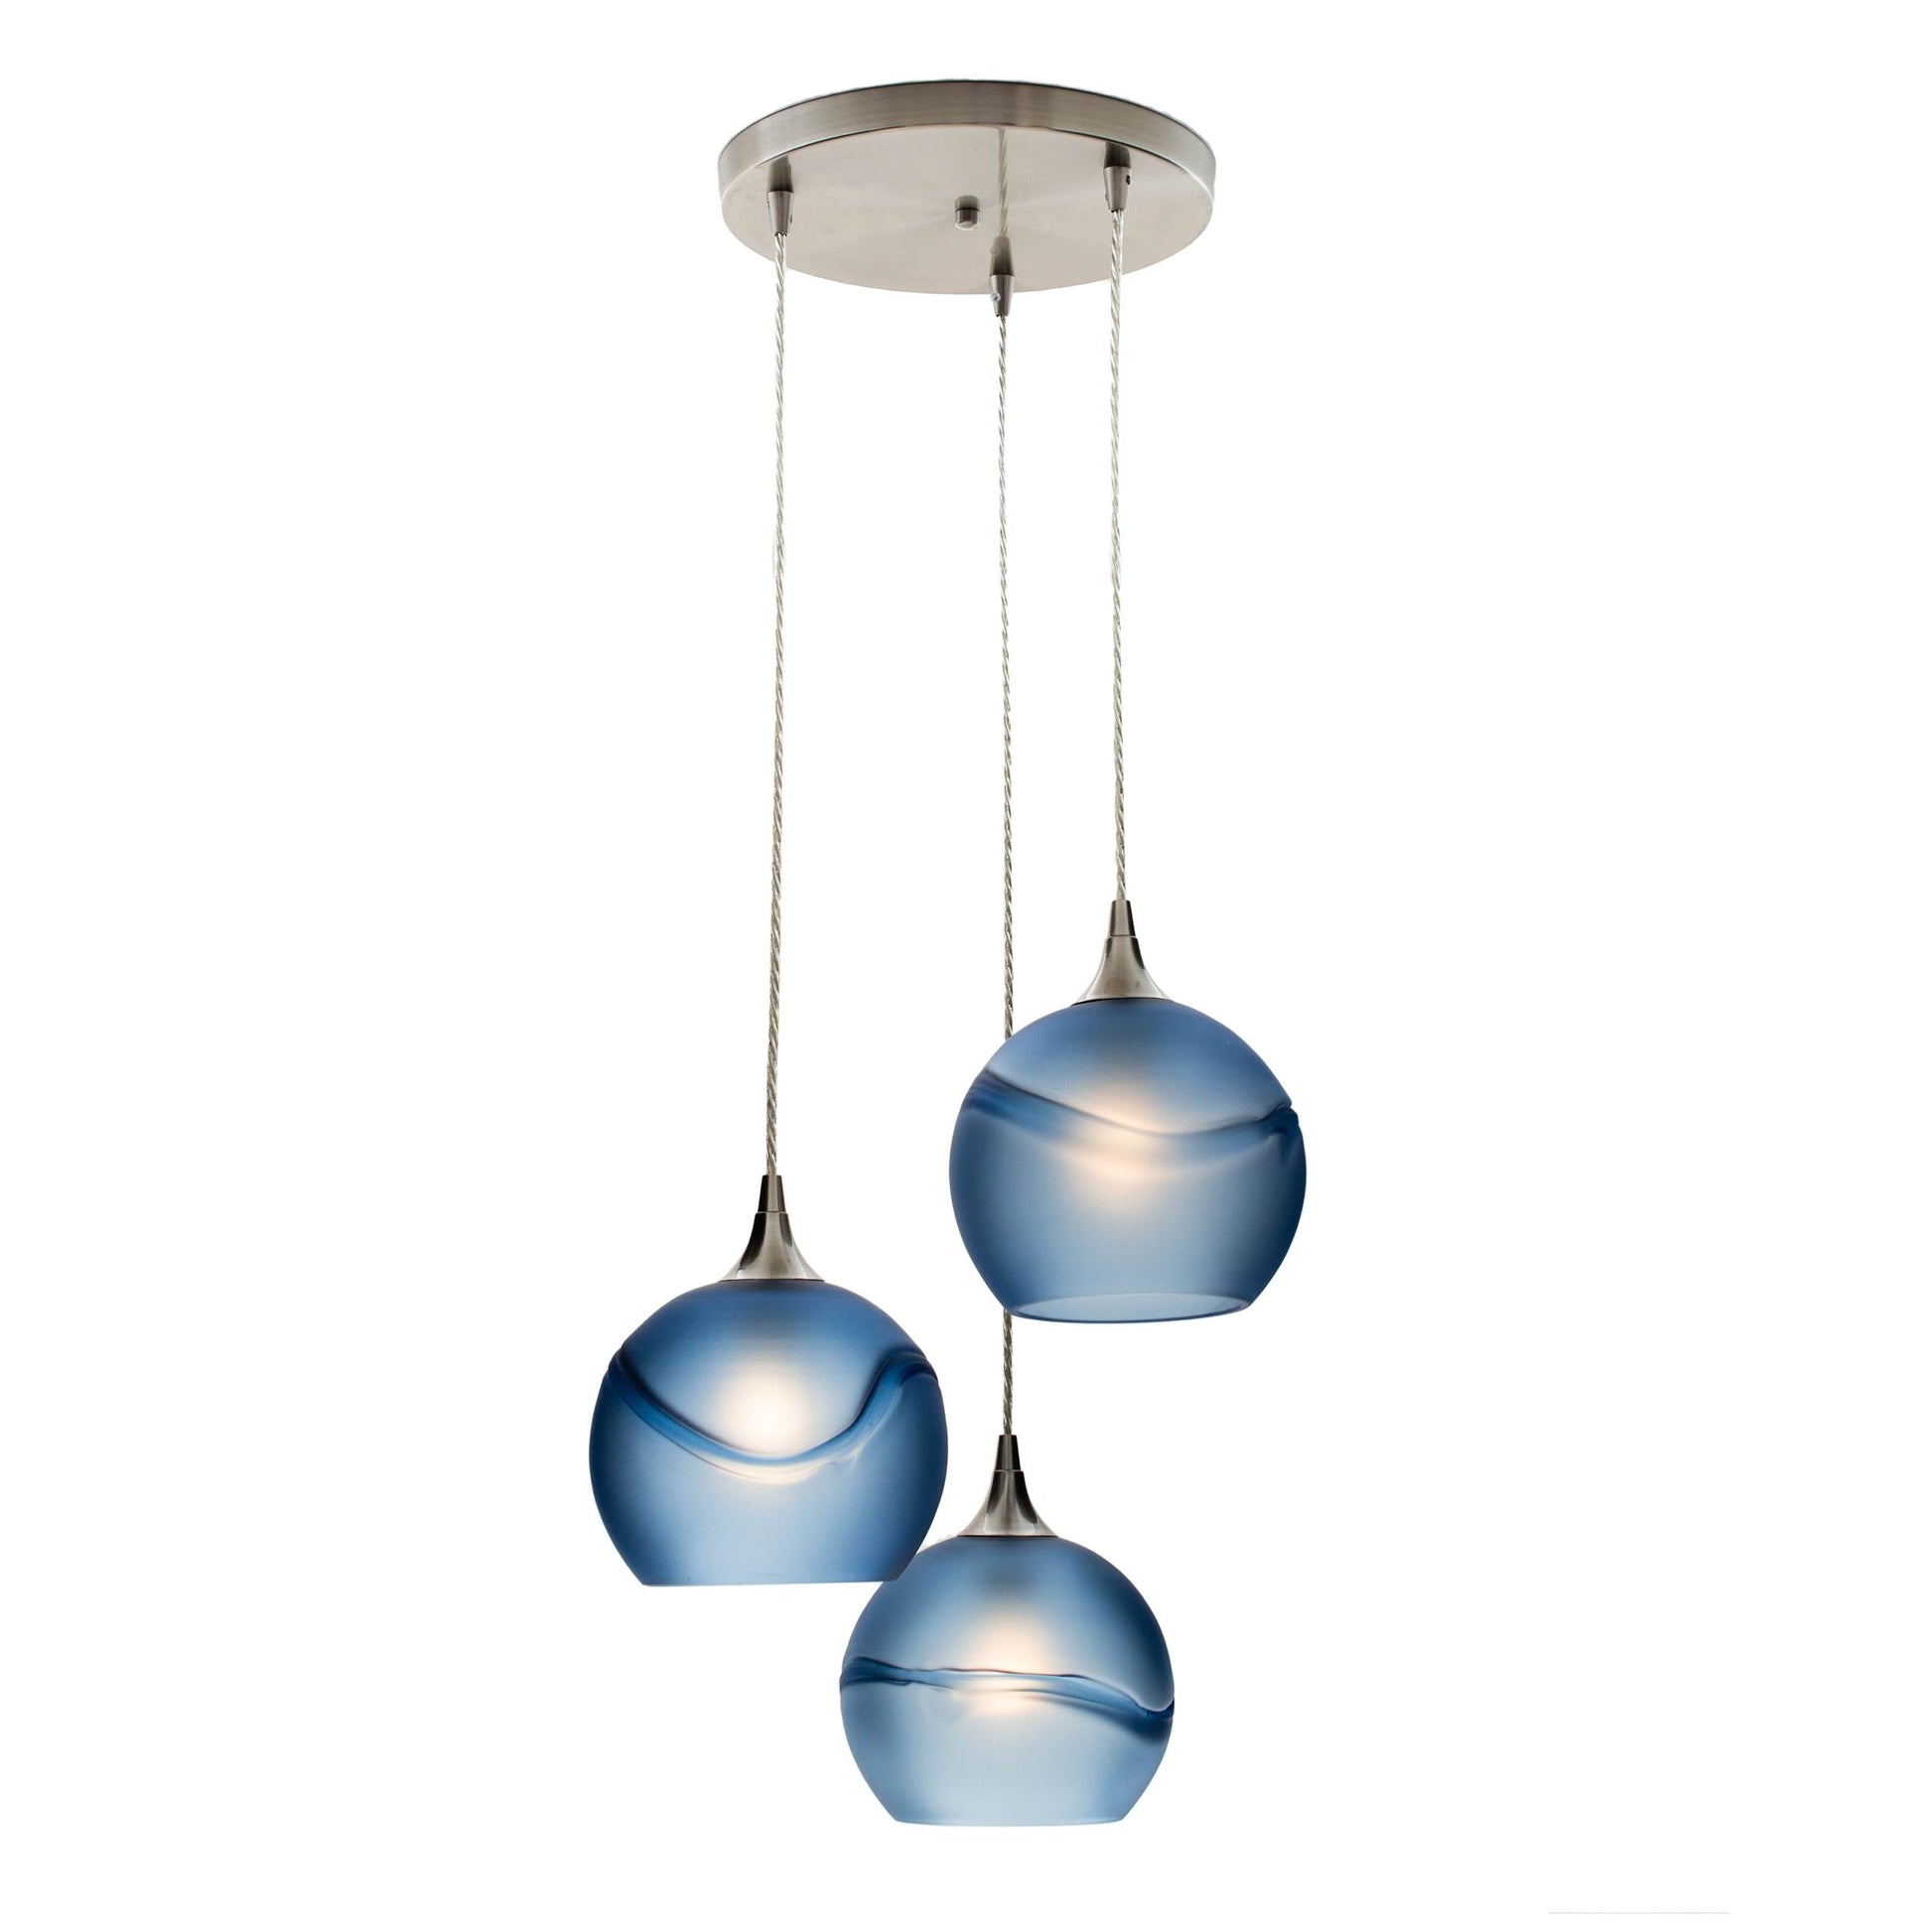 Bicycle Glass Co 767 Glacial: 3 Pendant Cascade Chandelier, Steel Blue Glass, Brushed Nickel Hardware, Light Bulbs On